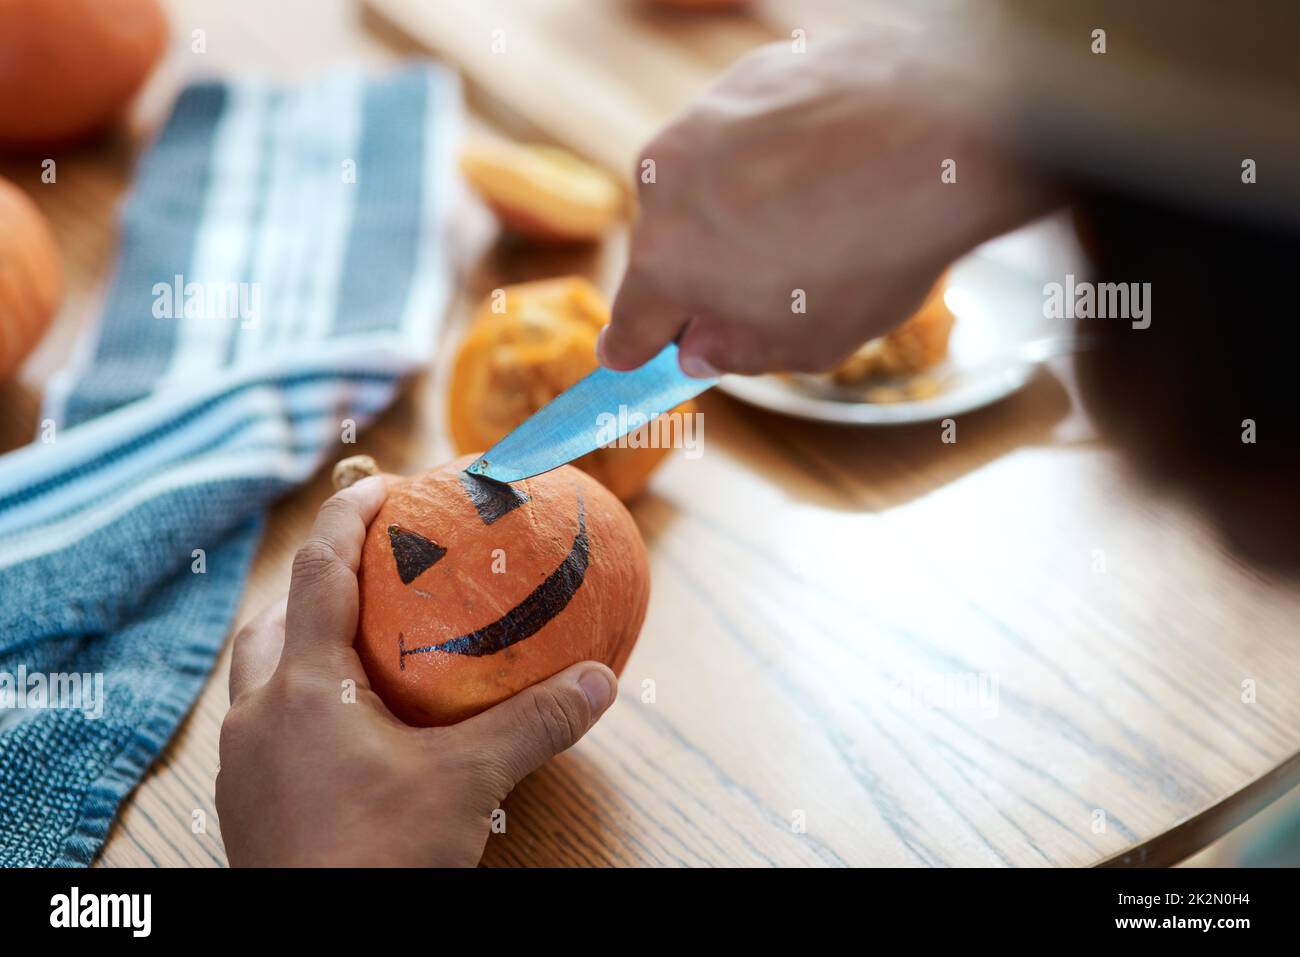 Tapping into the Halloween spirit. Shot of an unrecognizable person carving a pumpkin at home. Stock Photo